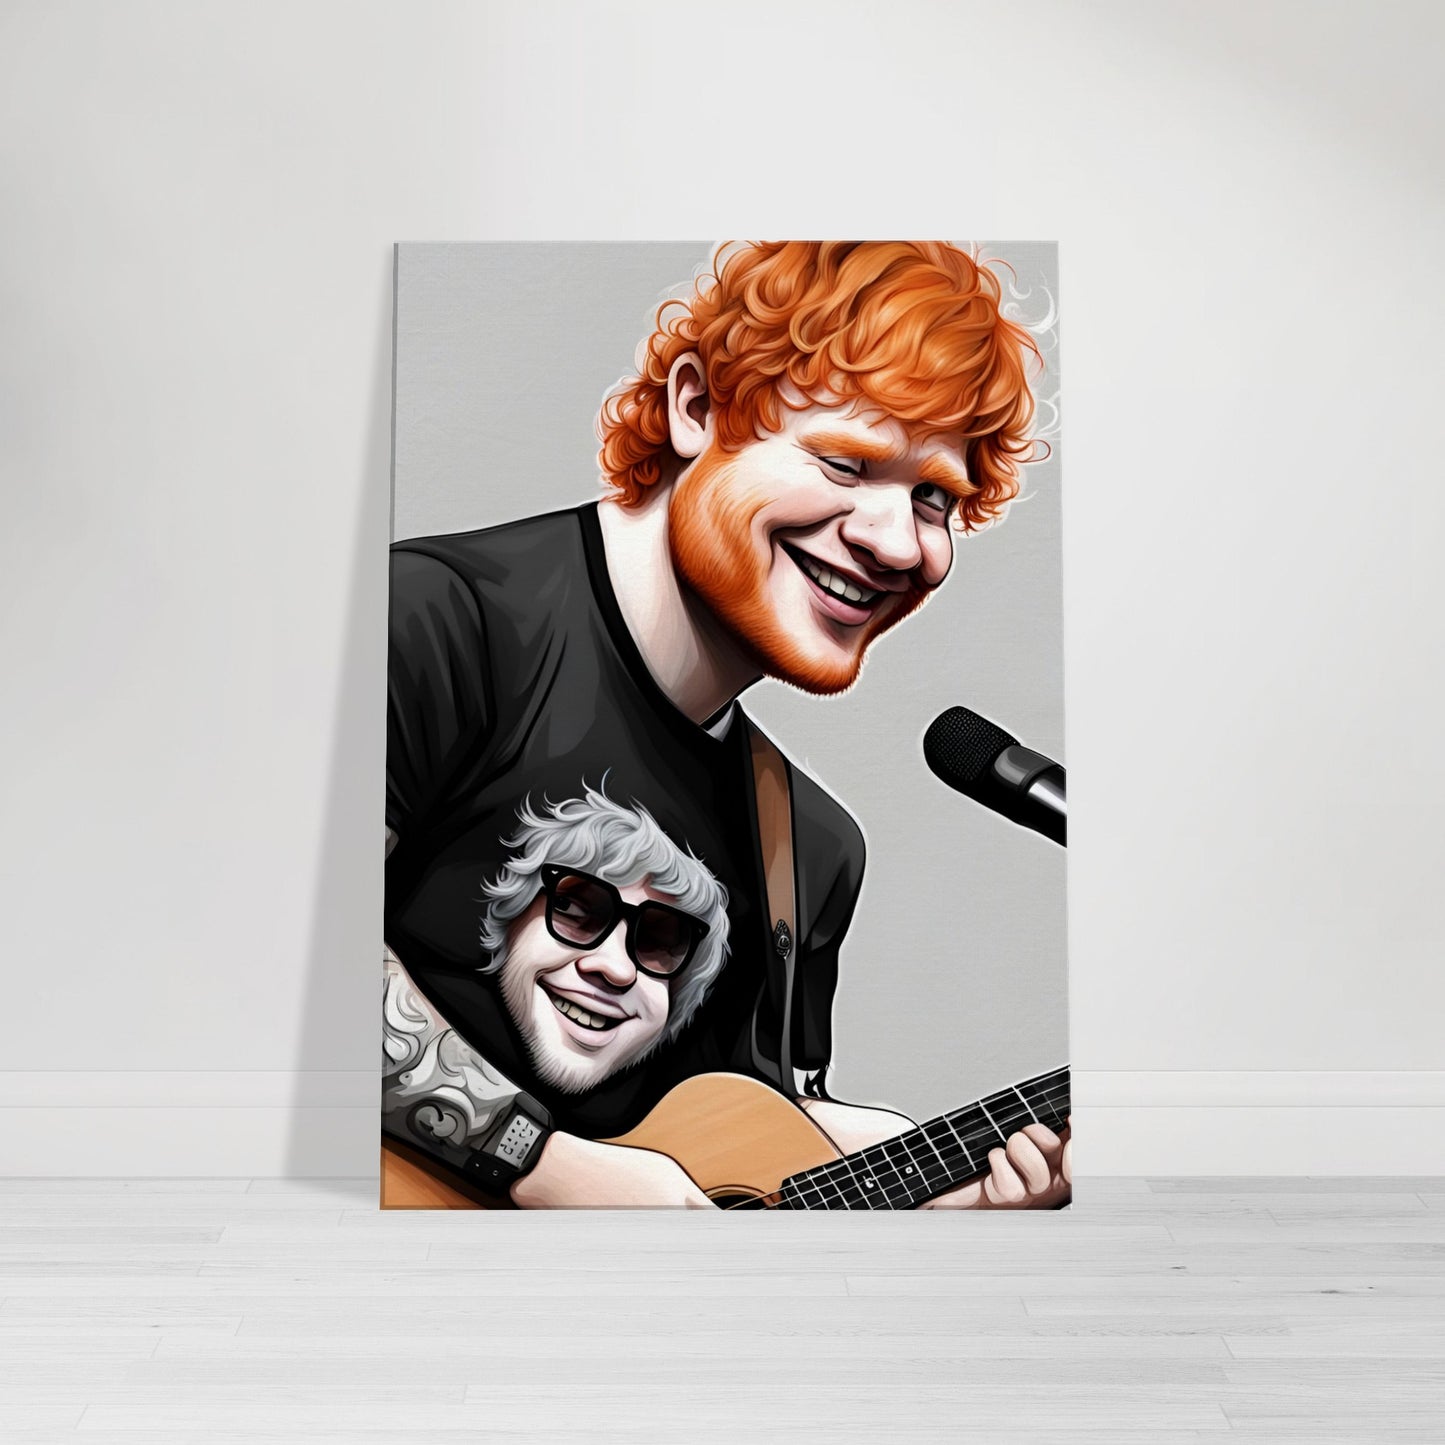 "Ed Sheeran: The Melodic Muse in Caricature" Caricature Art Canvas Art